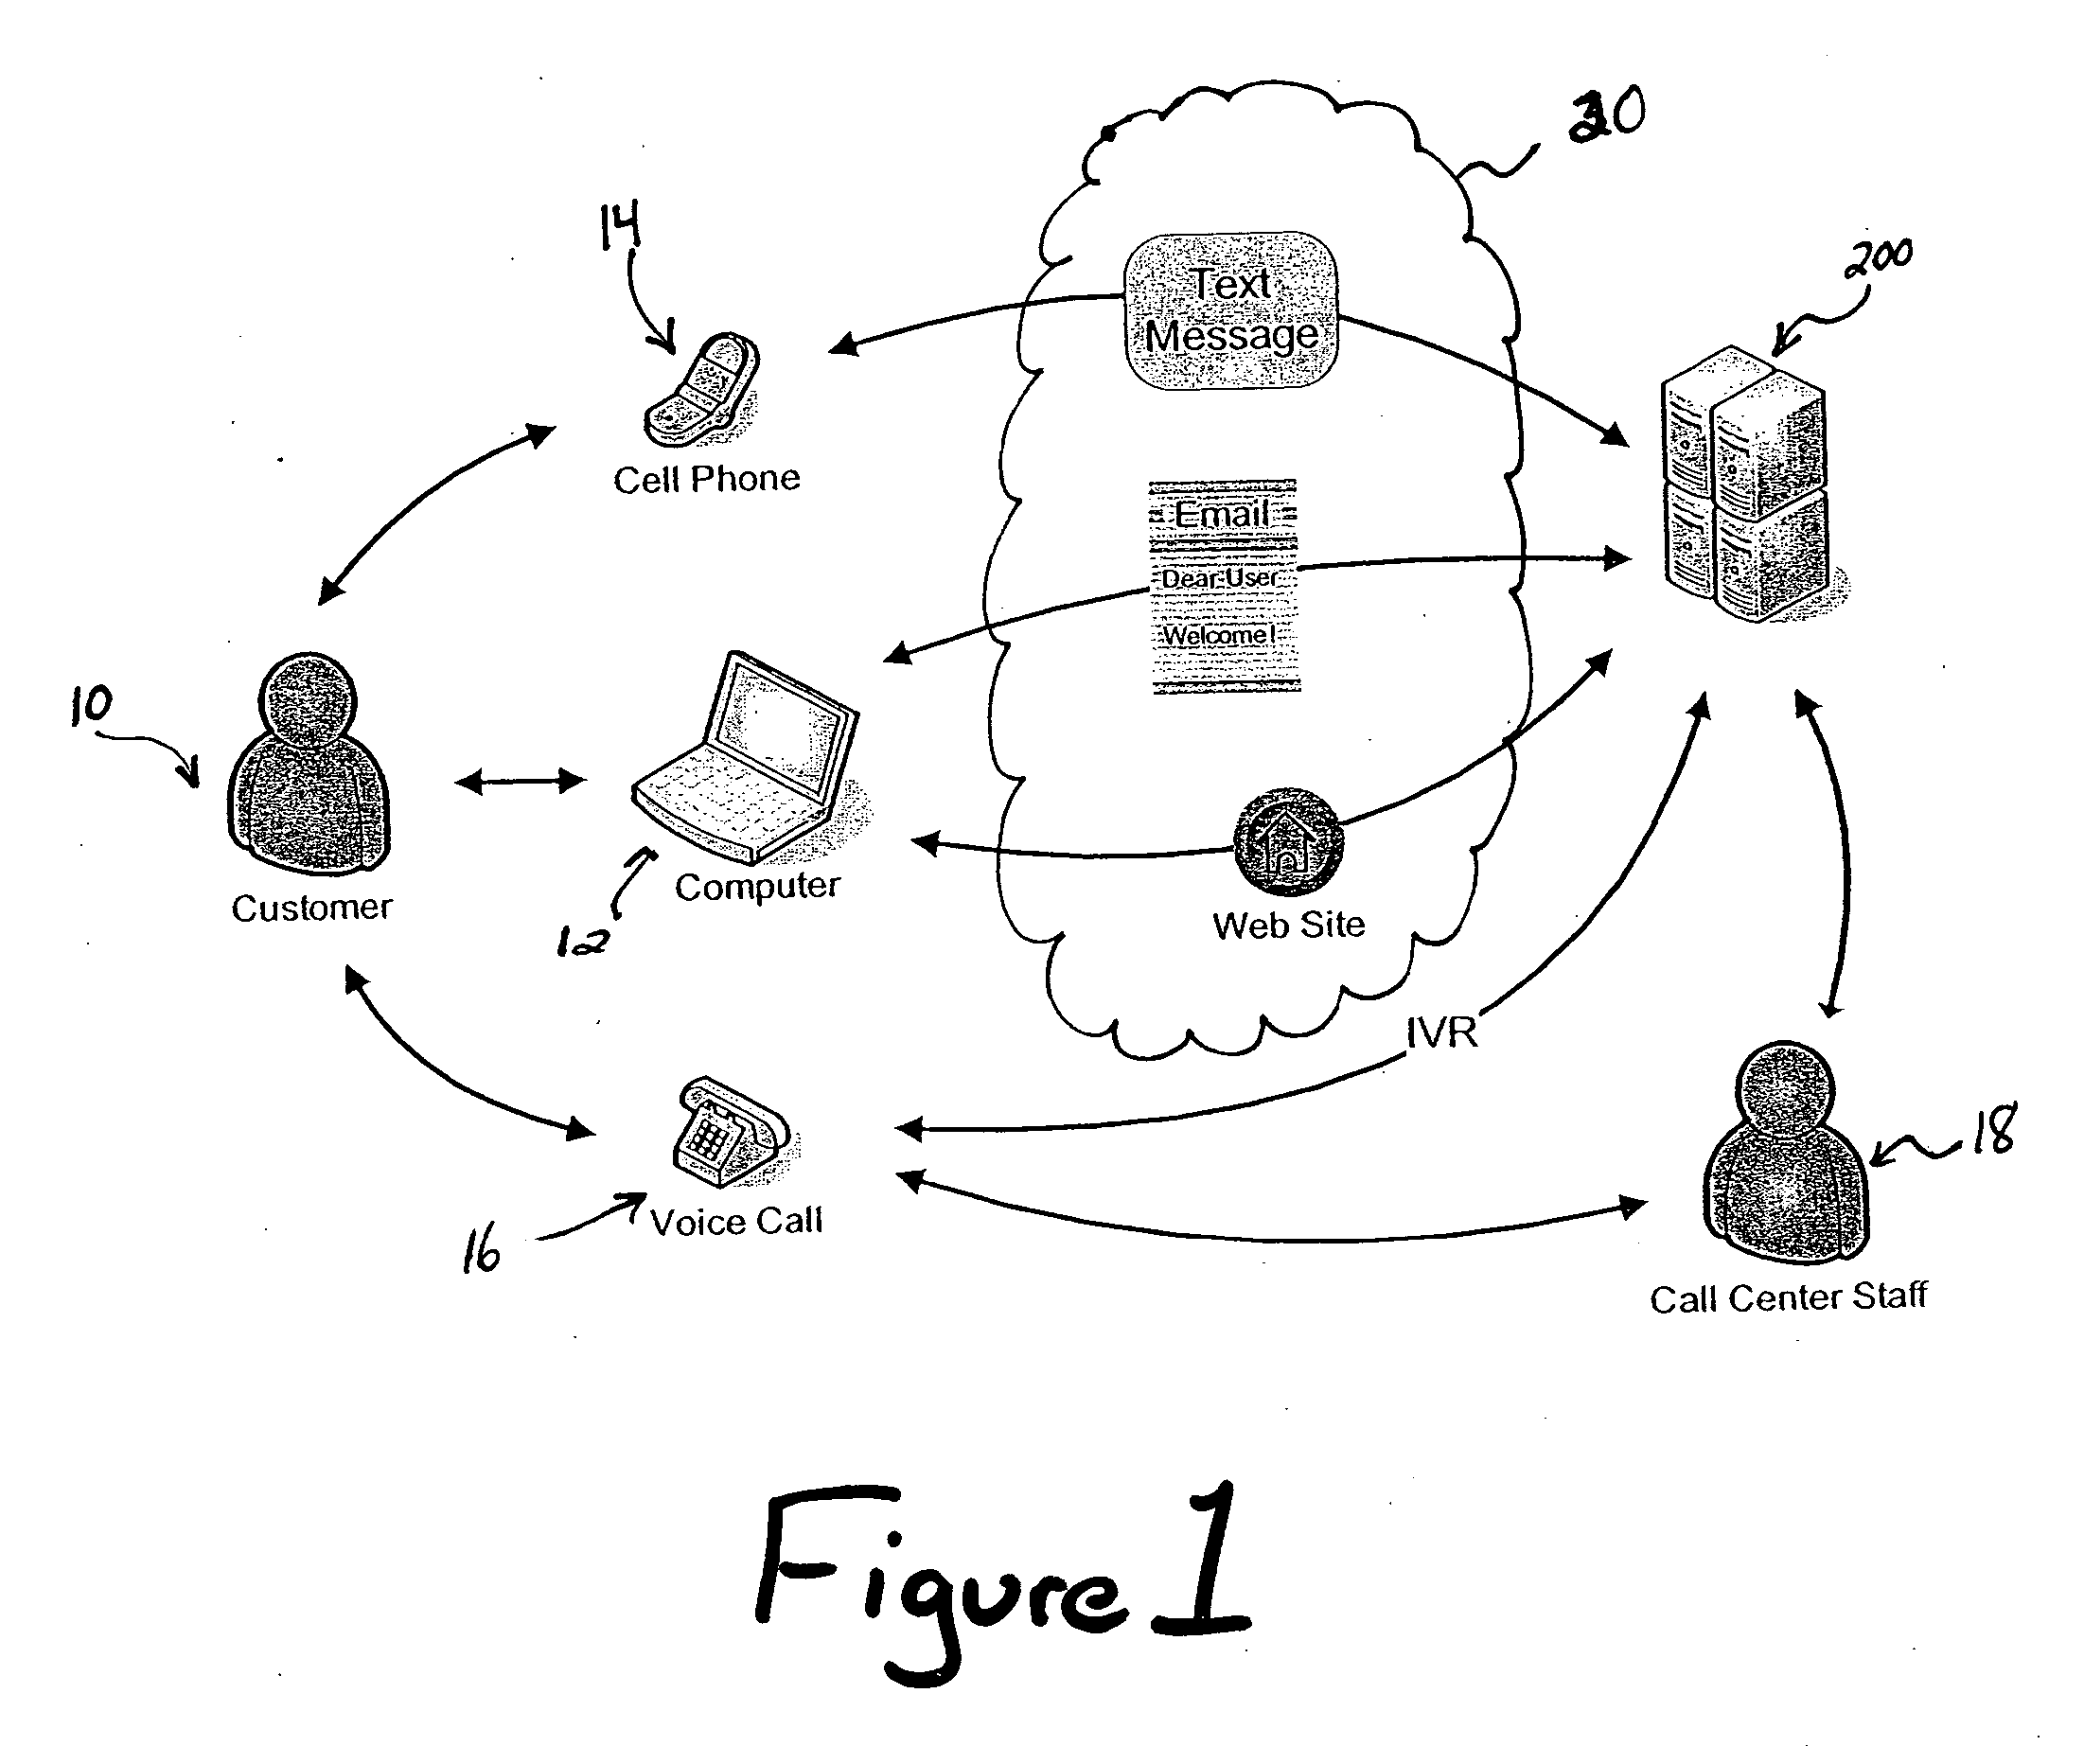 System and method for providing customized interactive and flexible nutritional counseling